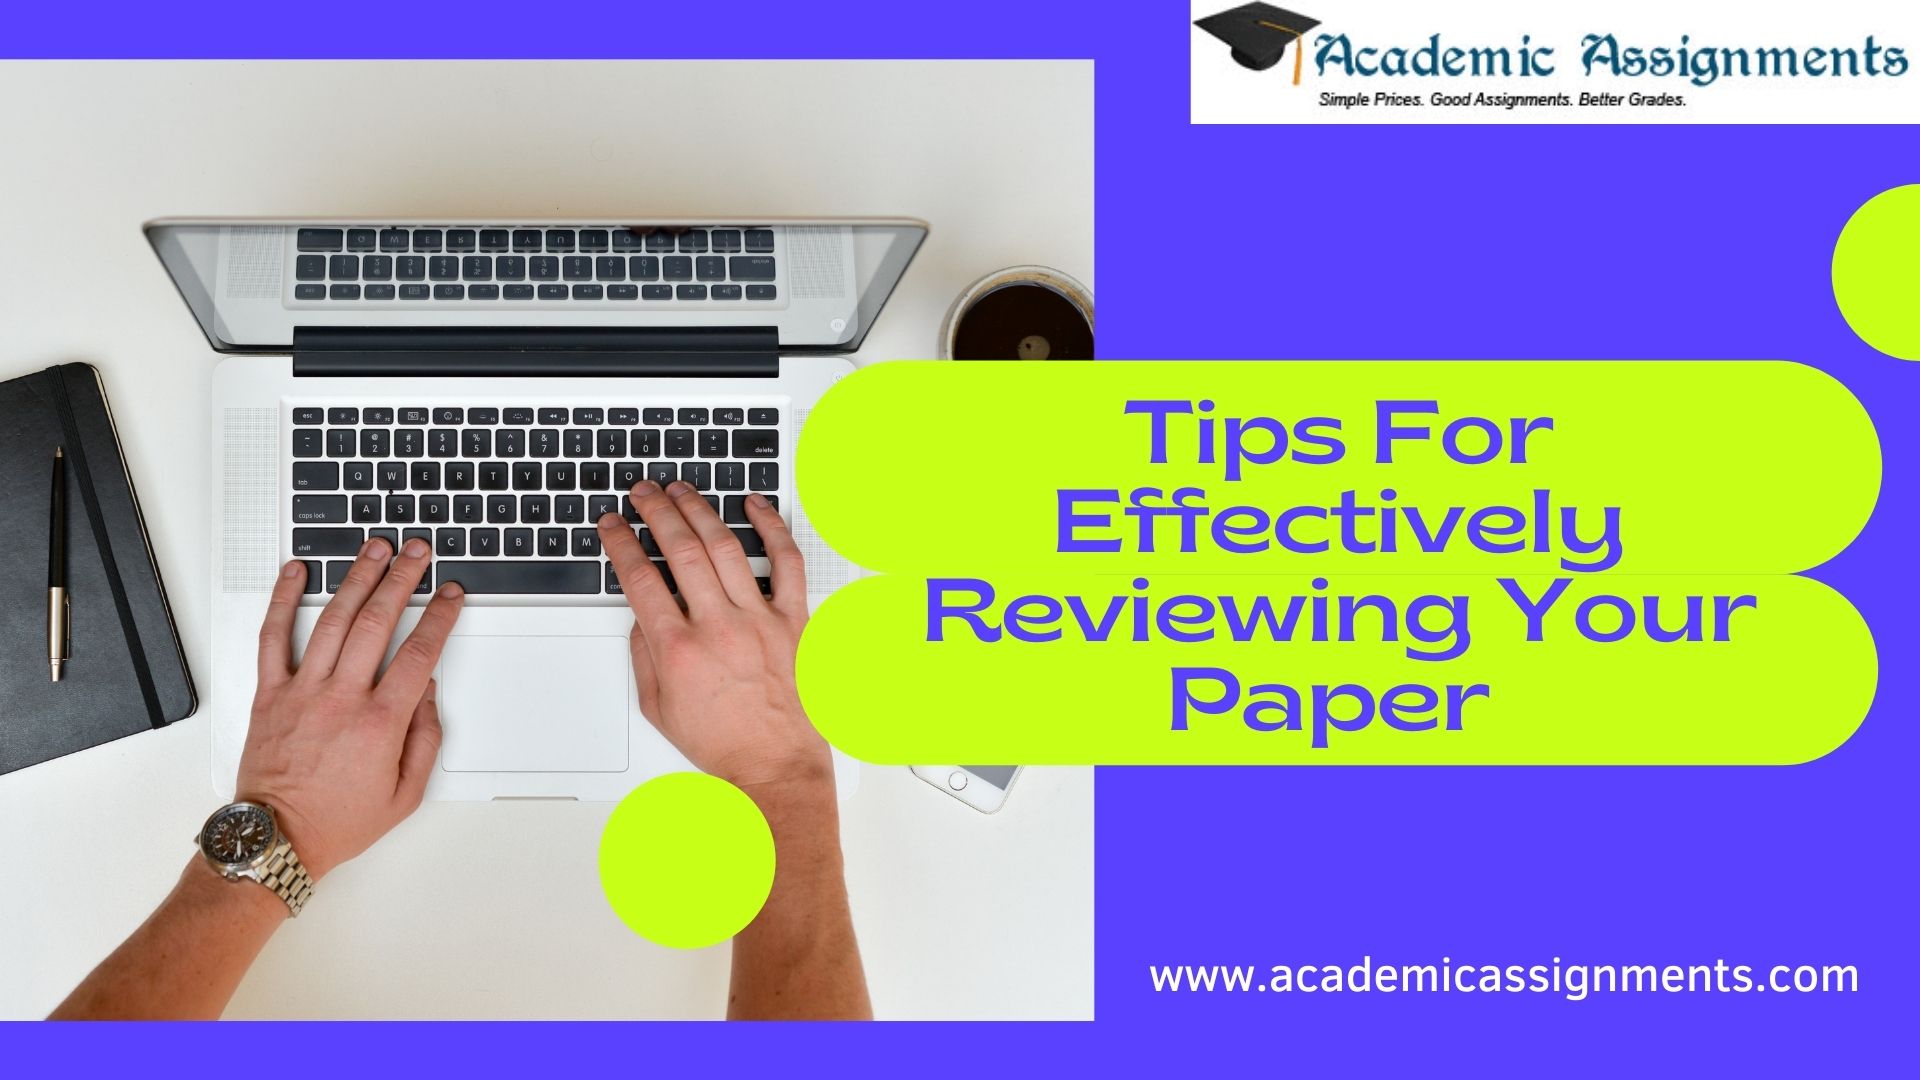 Tips For Effectively Reviewing Your Paper